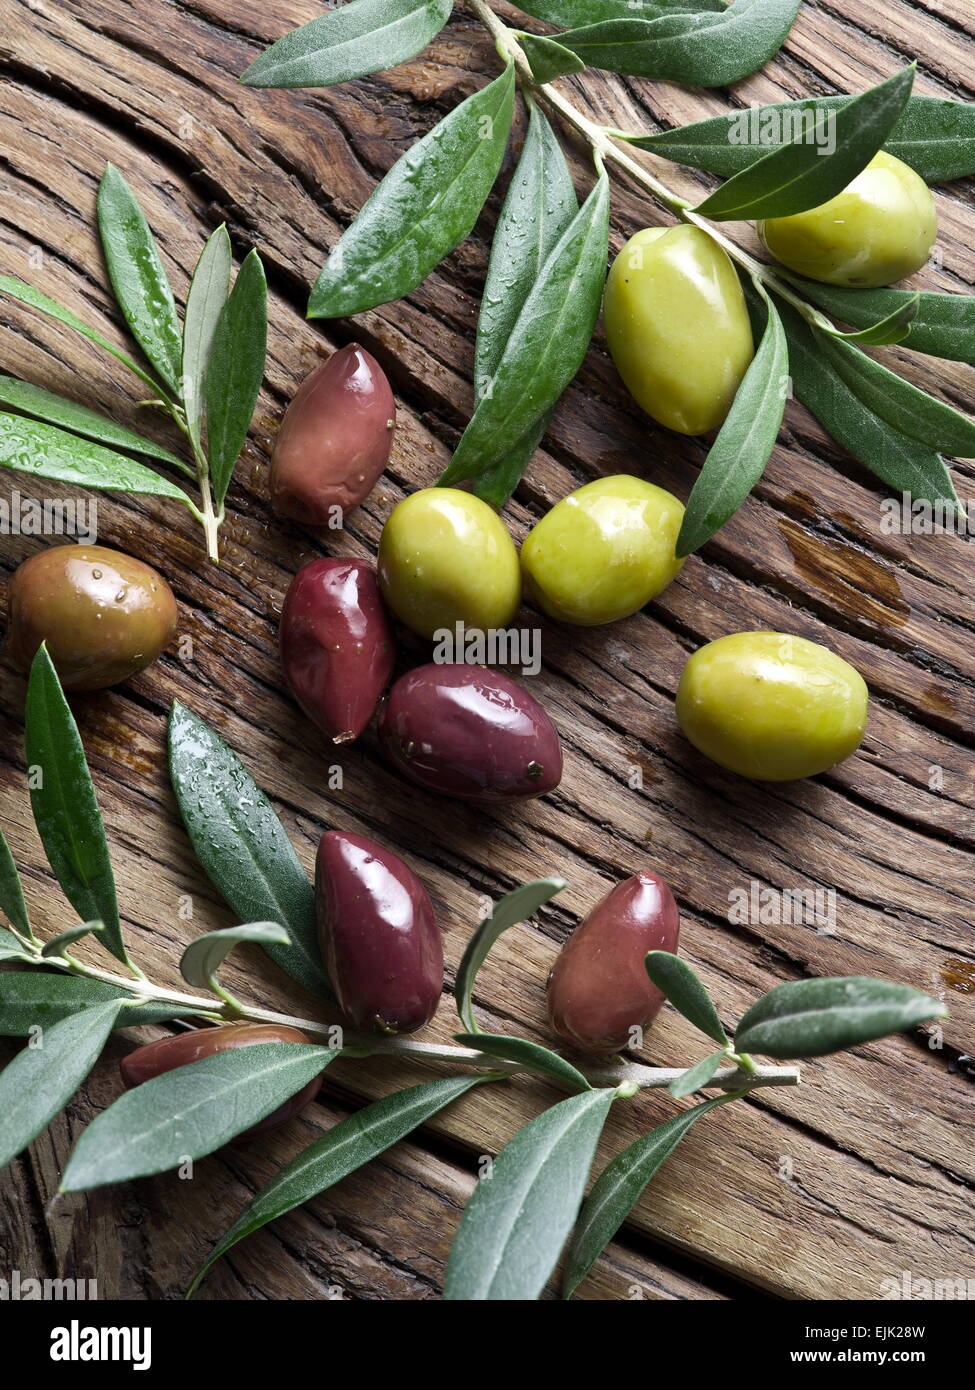 Olives and olive twigs on wooden table. Stock Photo